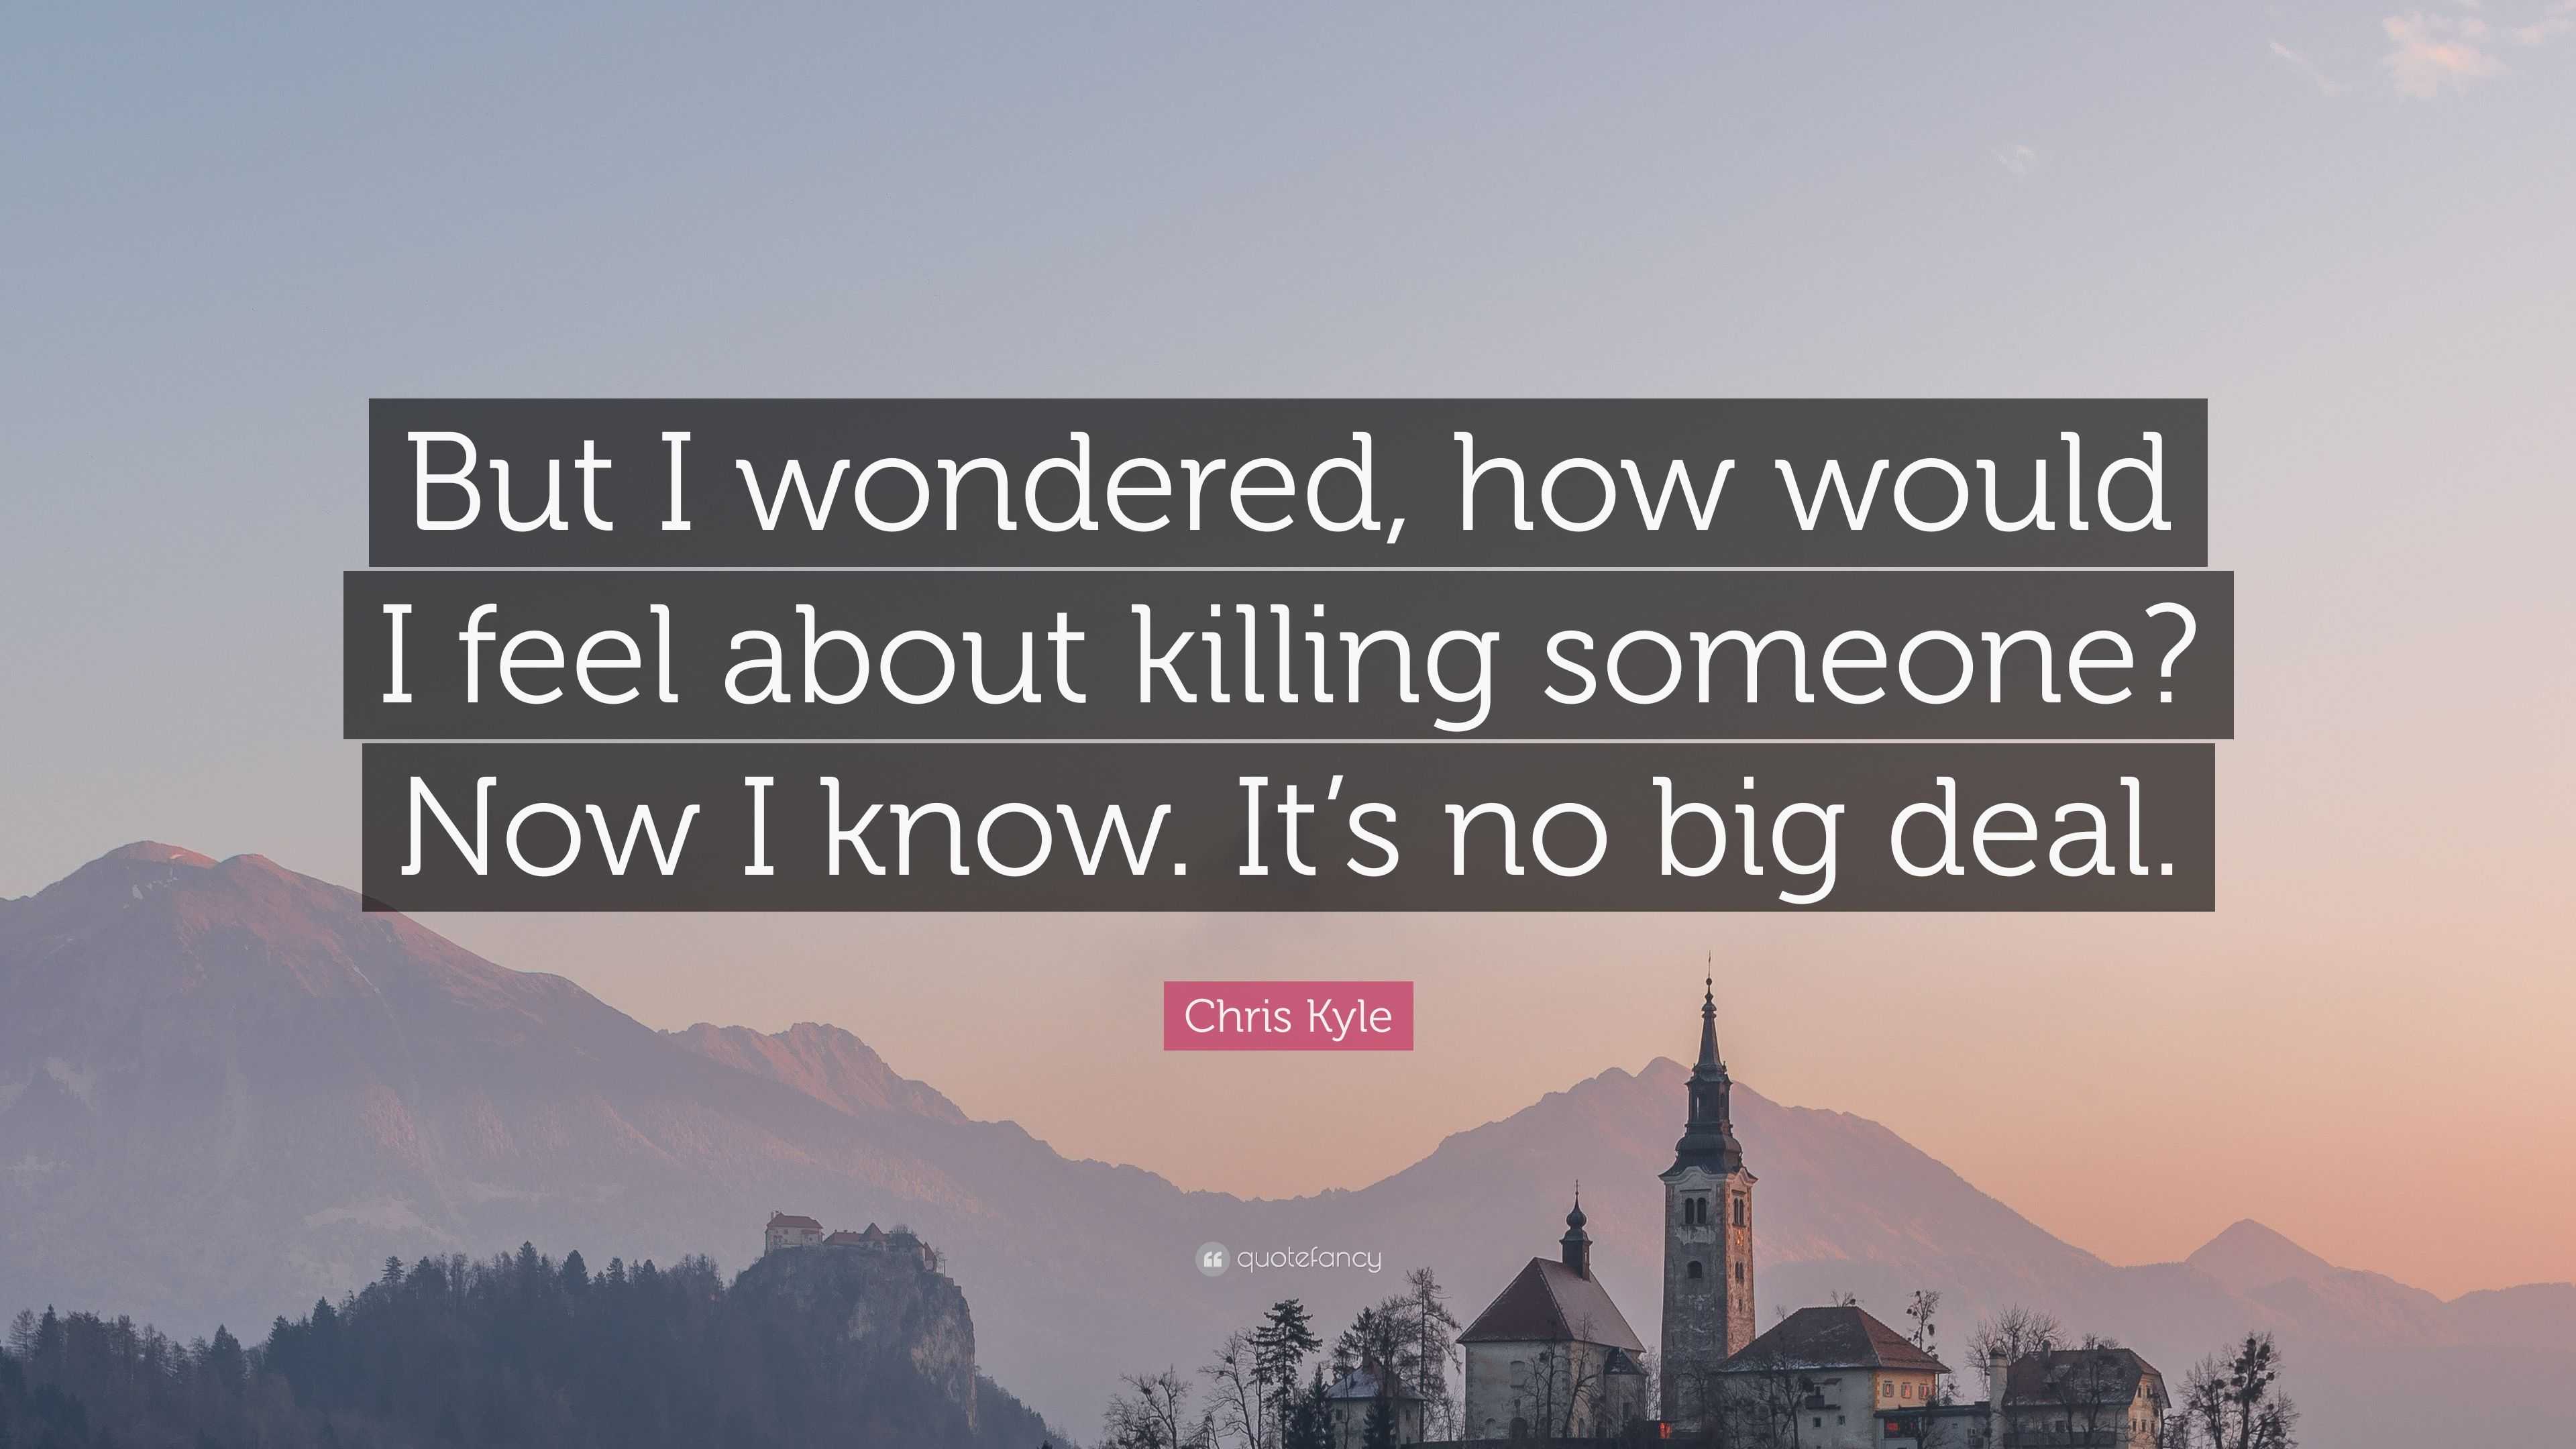 Chris Kyle Quote: “But I wondered, how would I feel about killing ...